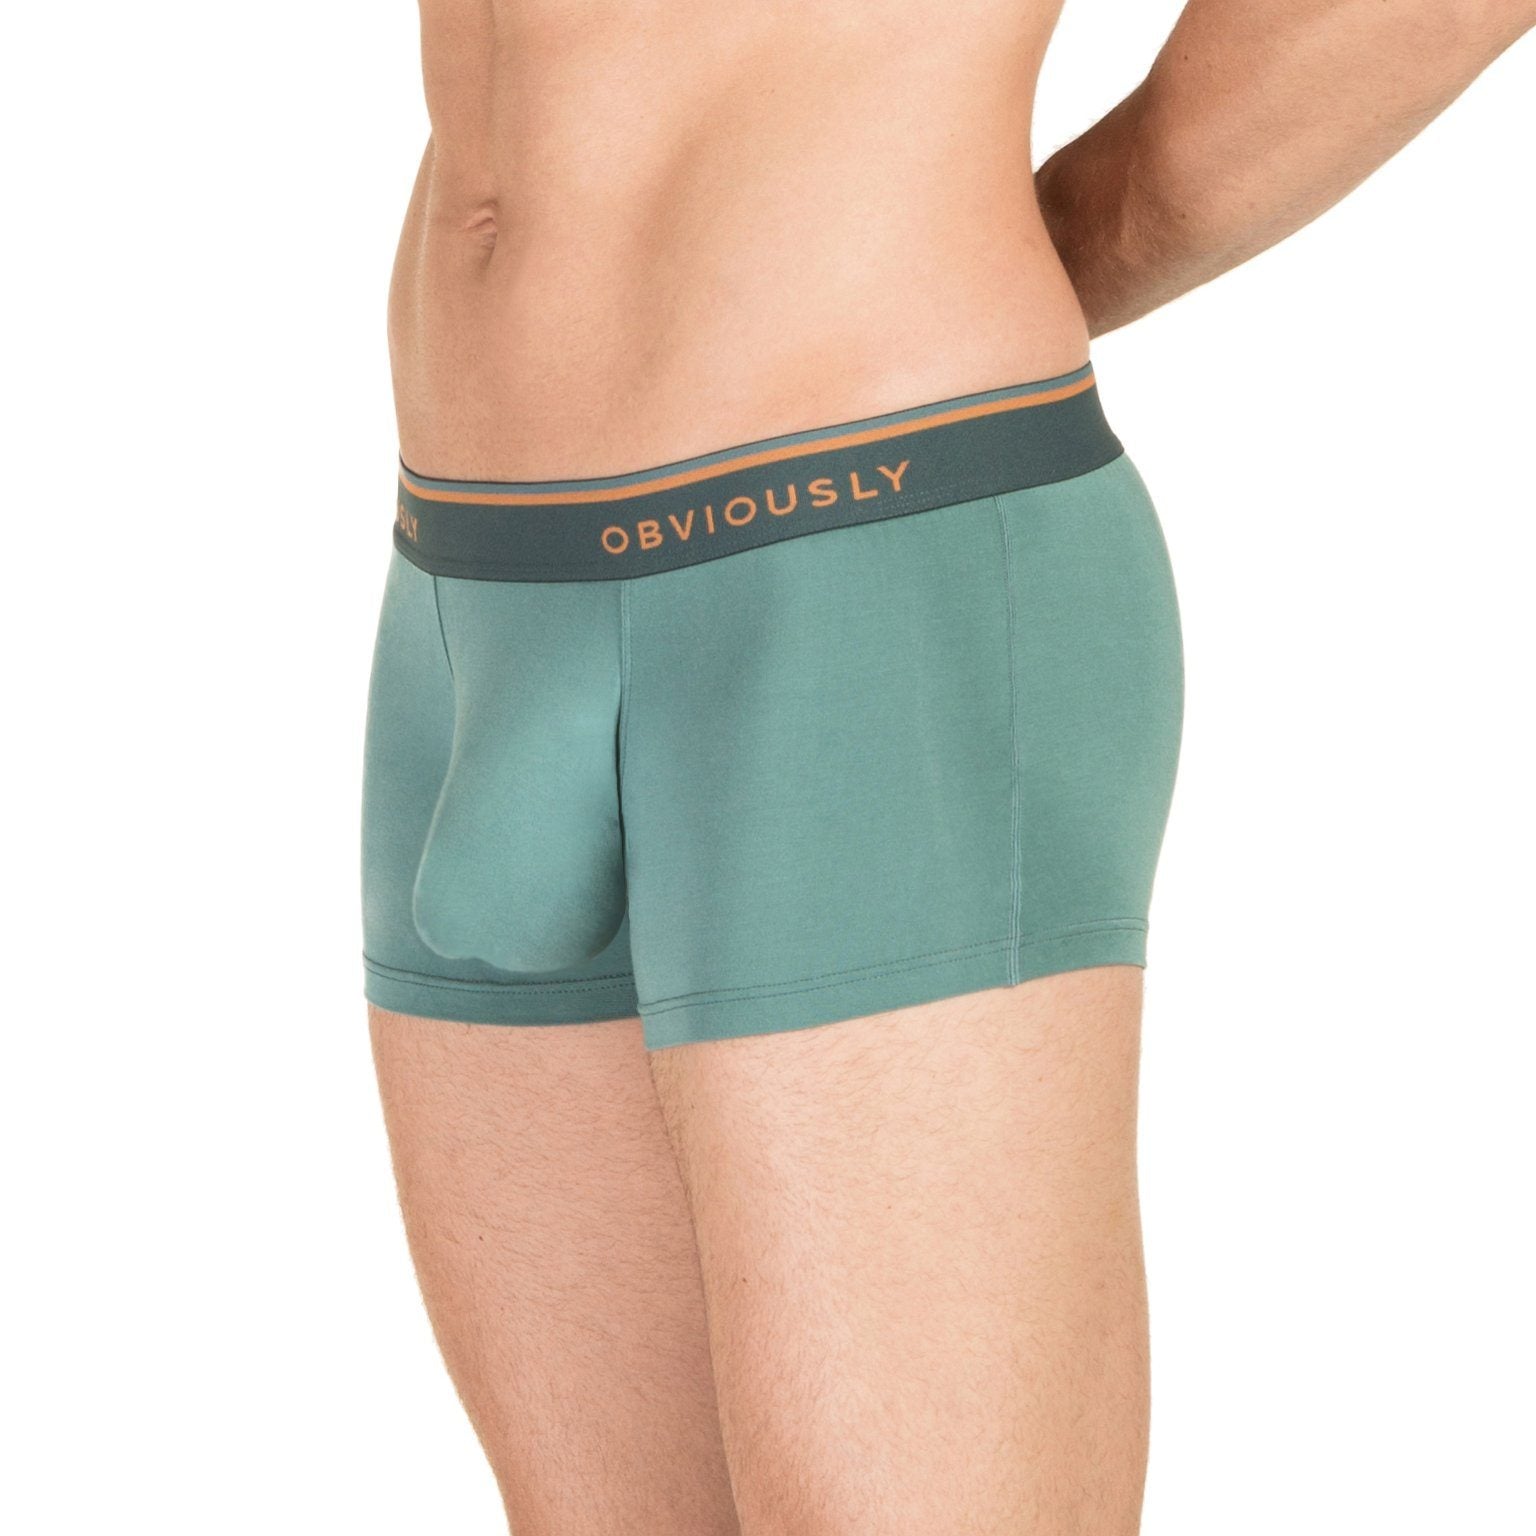 EveryMan - Trunk Obviously Apparel Teal Small 